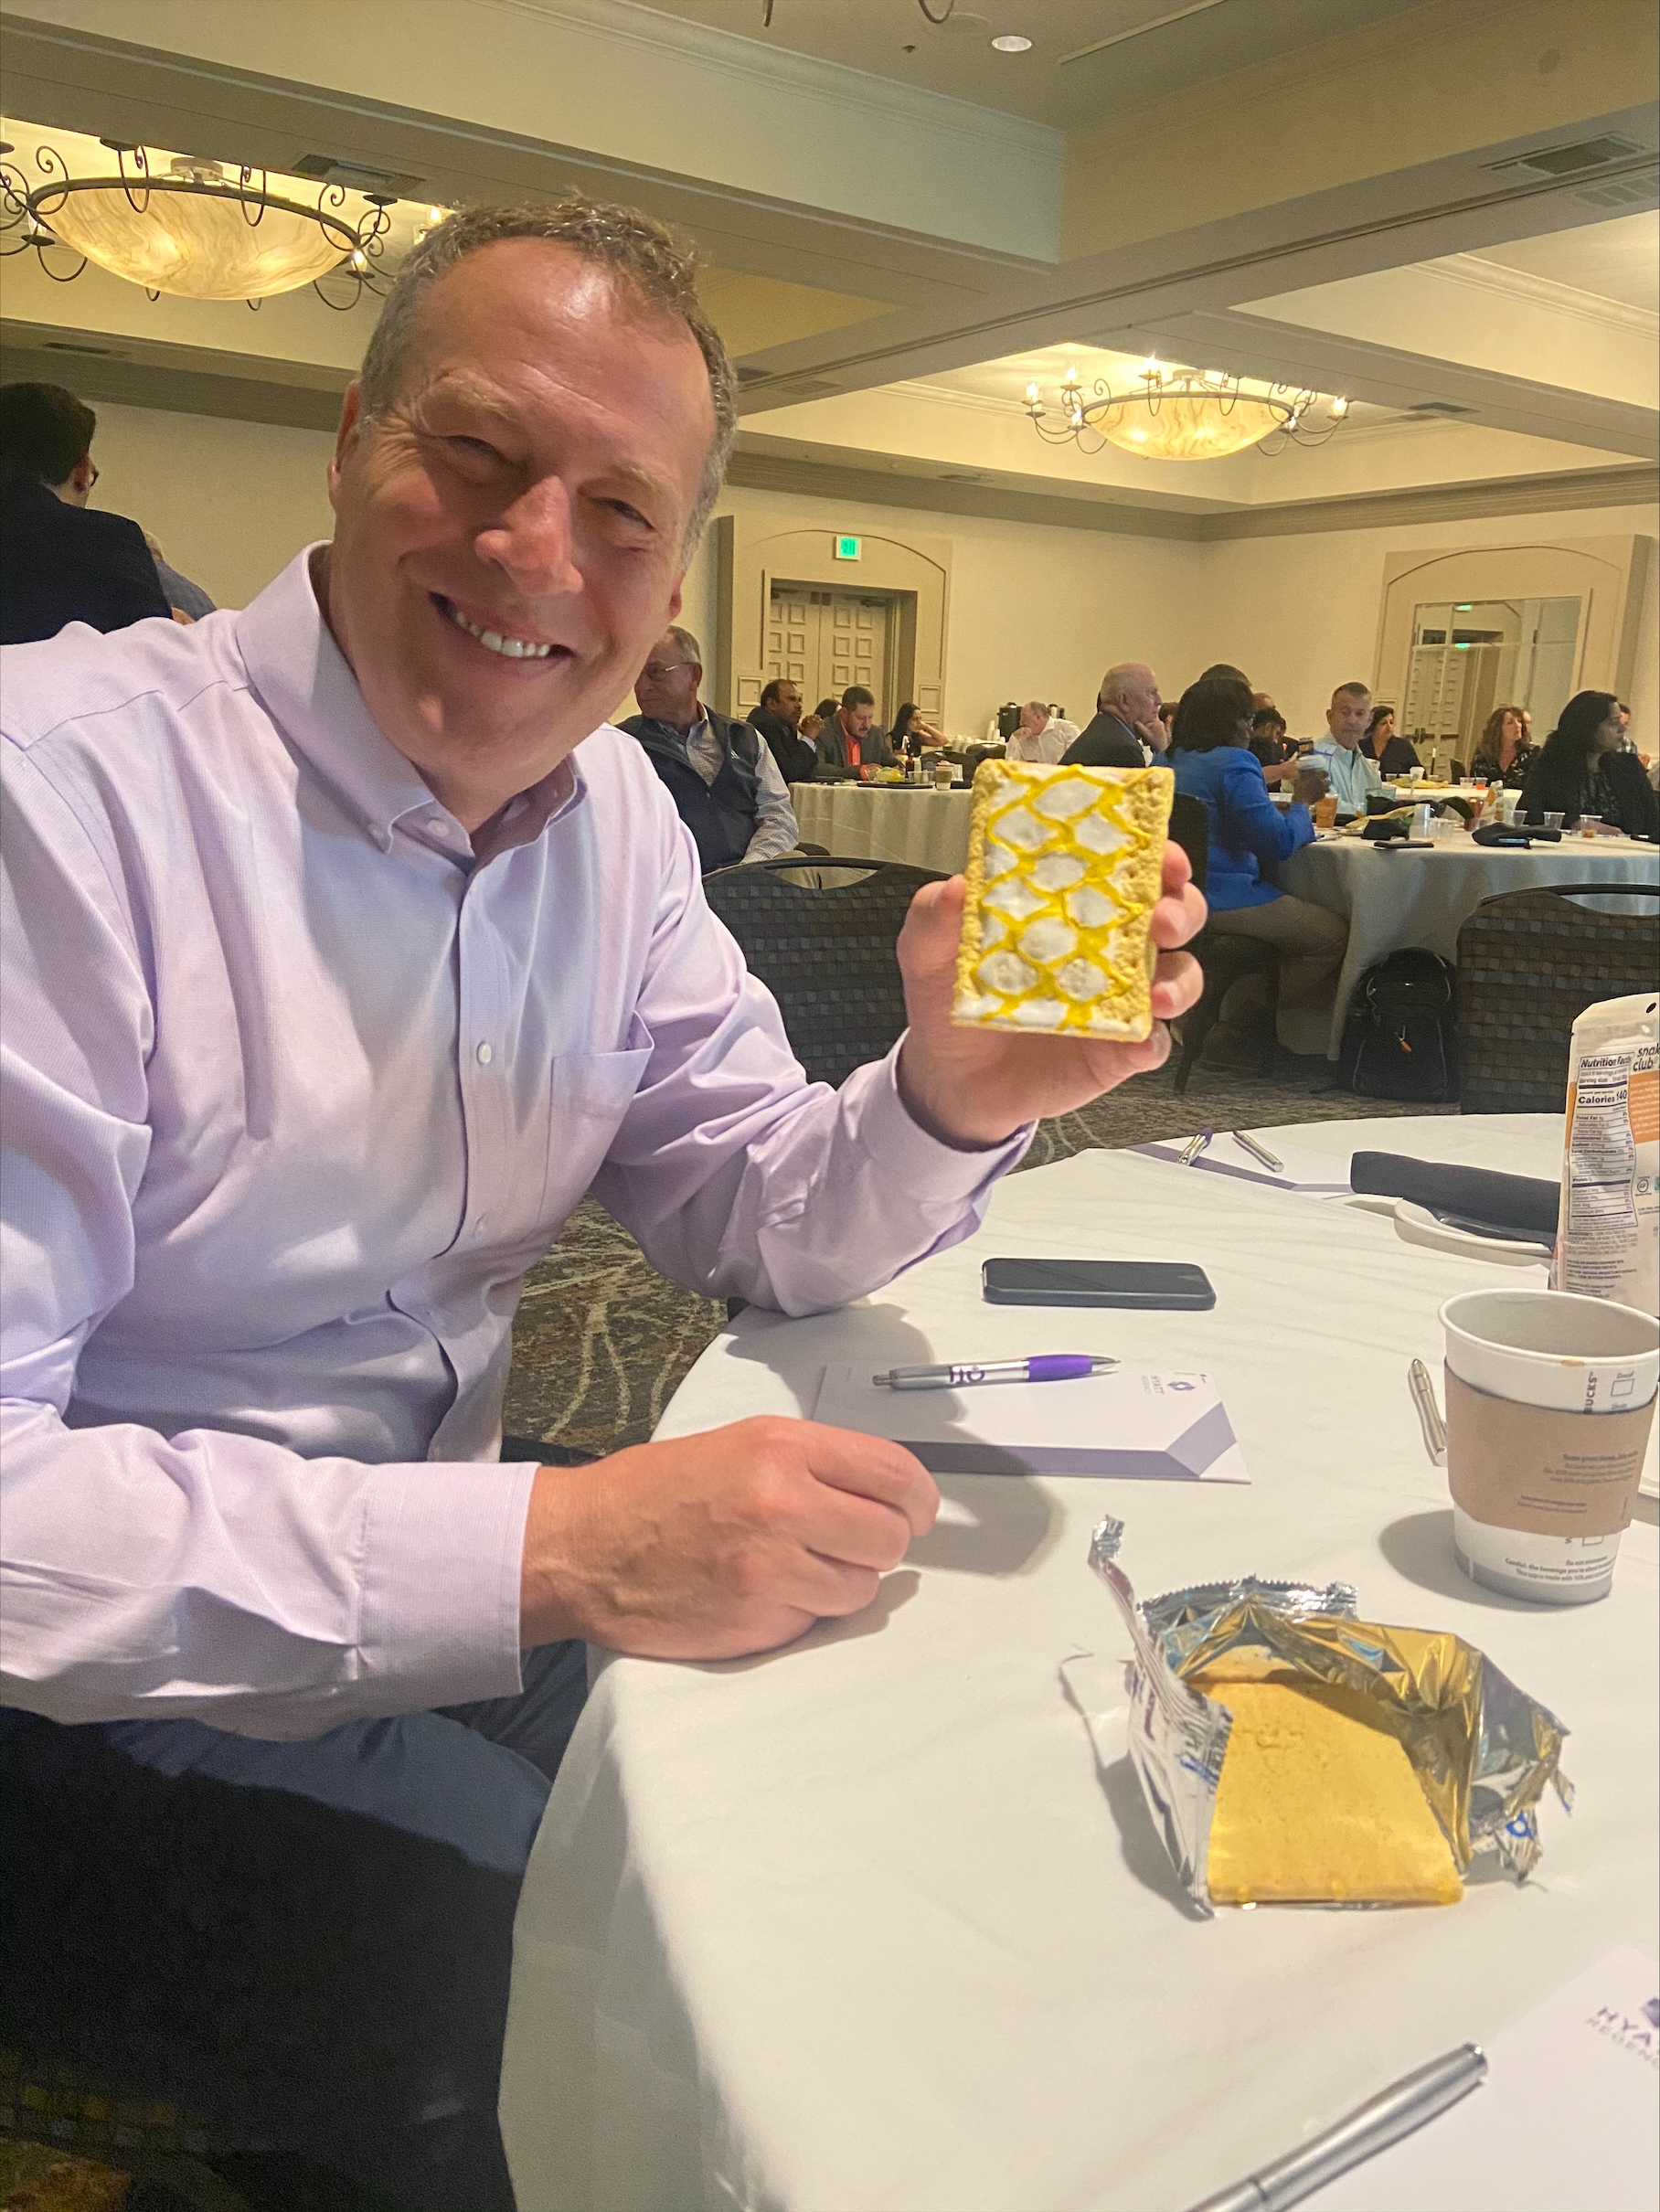 In 2022, Estep attended an Olam Food Ingredients global spice meeting in California to discuss incorporating spice products into new applications, such as Pop Tarts. Photo courtesy of LauraBeth Grubb.